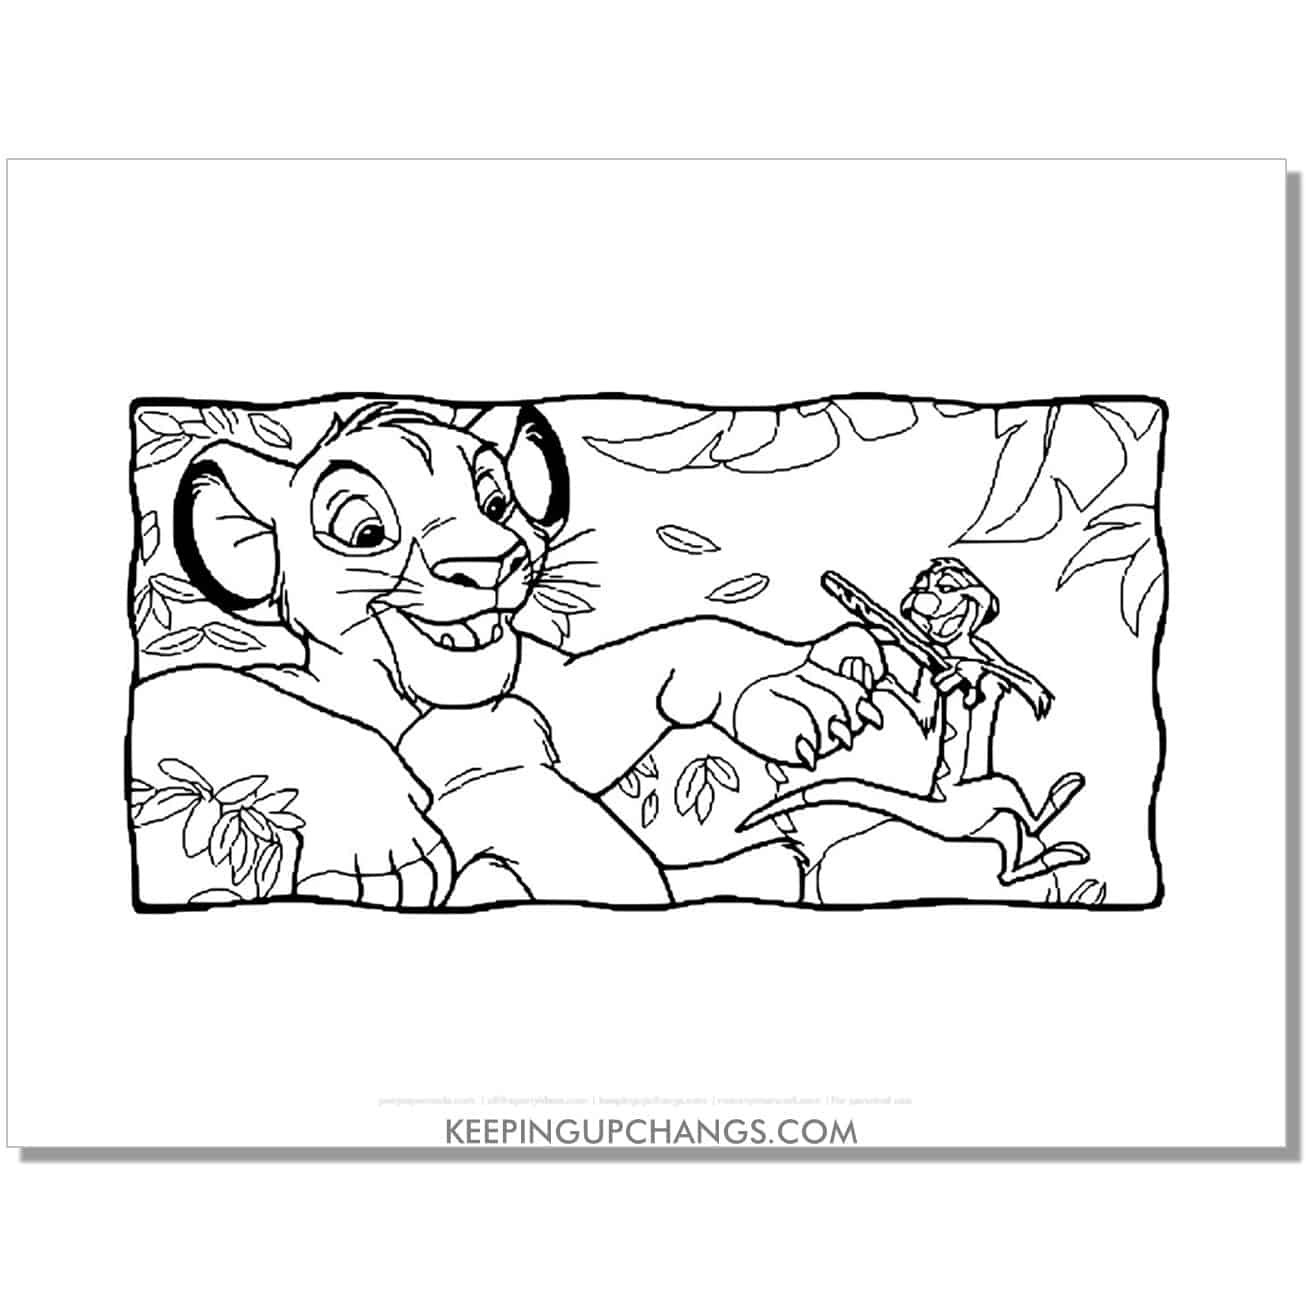 simba having nails filed by timon lion king coloring page, sheet.